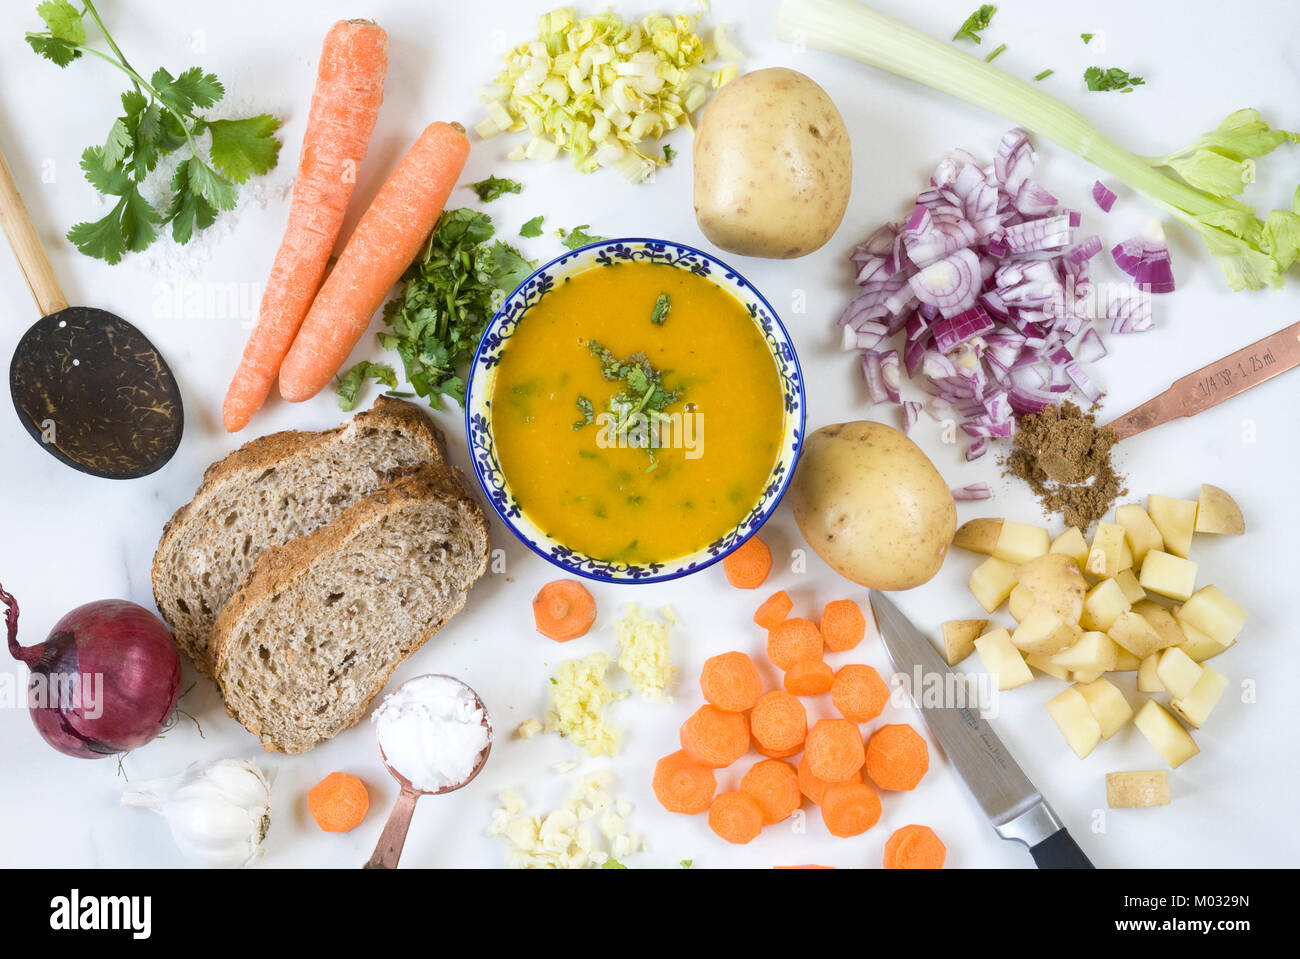 Ingredients for carrot, coriander and ginger soup. Stock Photo